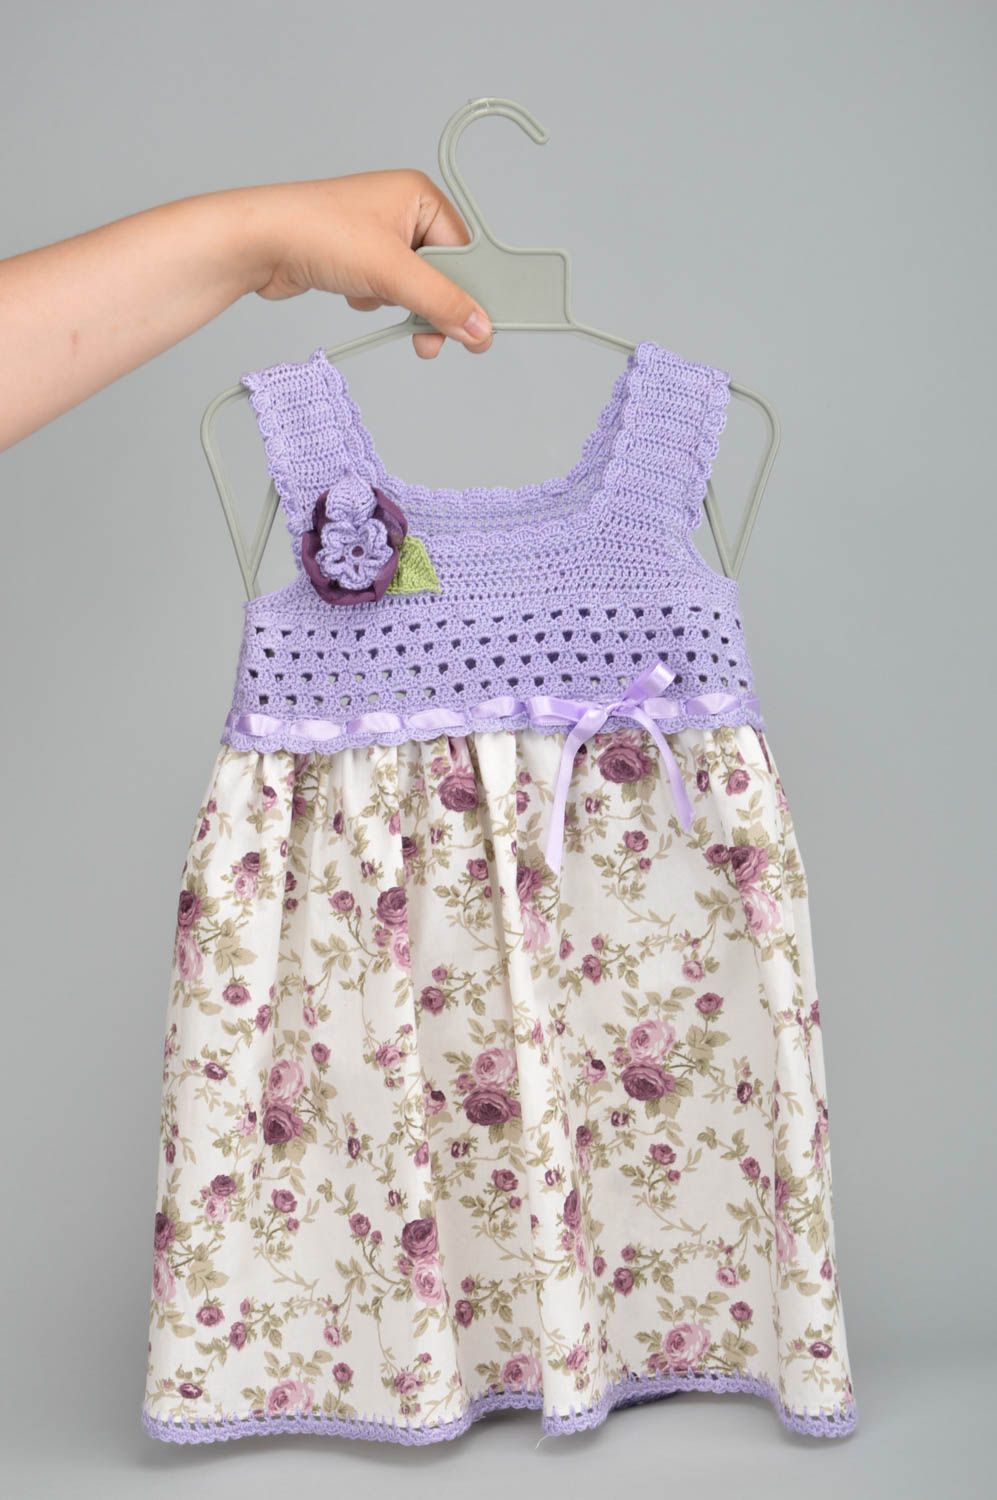 Beautiful handmade baby dress cute baby outfits fashion kids clothes for kids photo 1